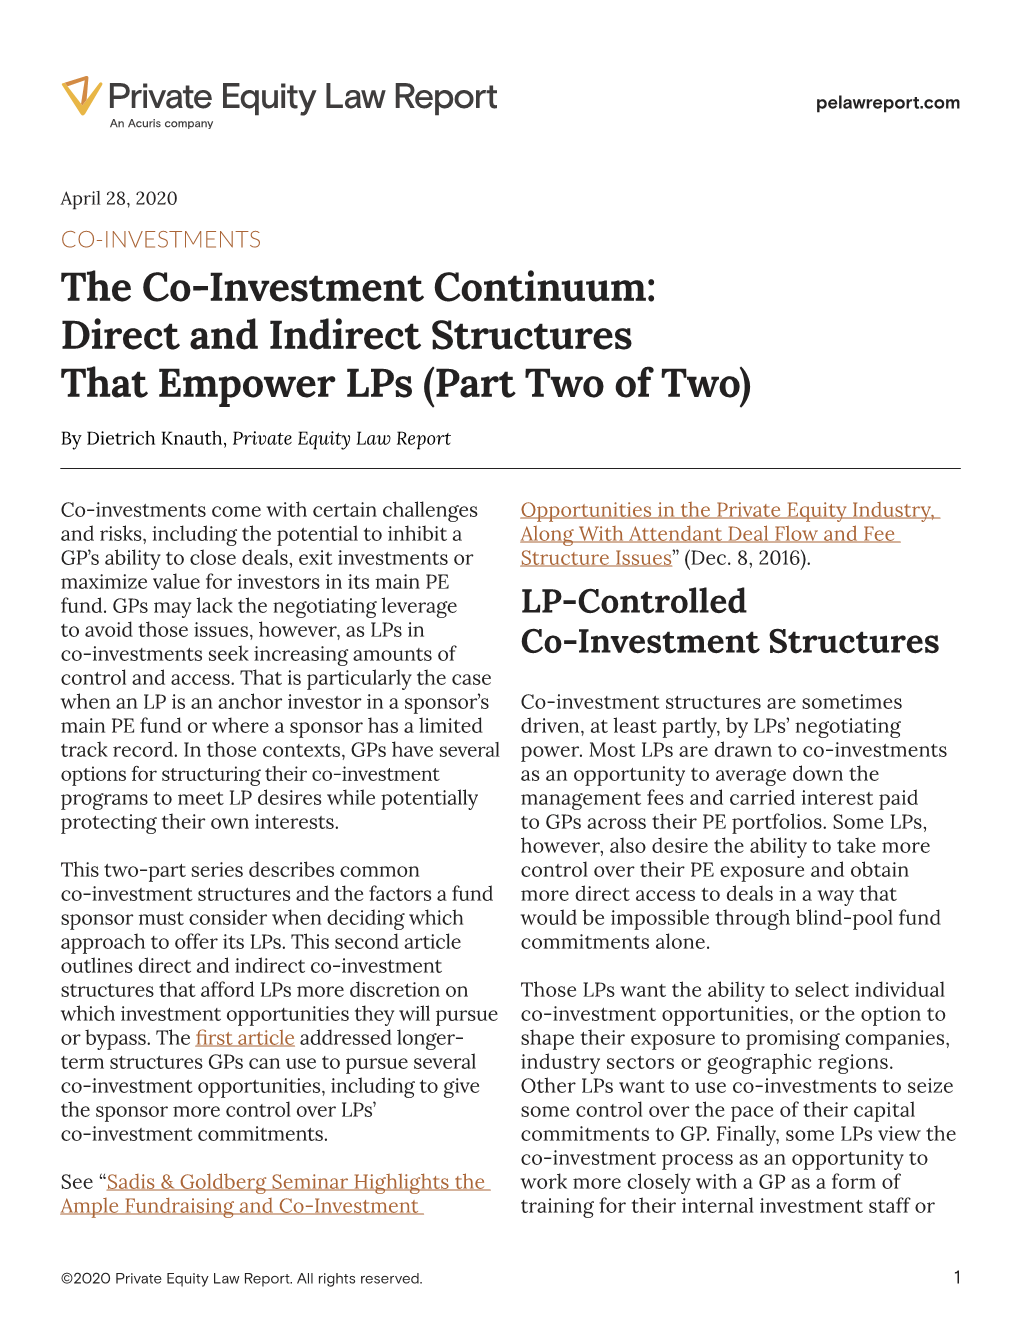 The Co‑Investment Continuum: Direct and Indirect Structures That Empower Lps (Part Two of Two)